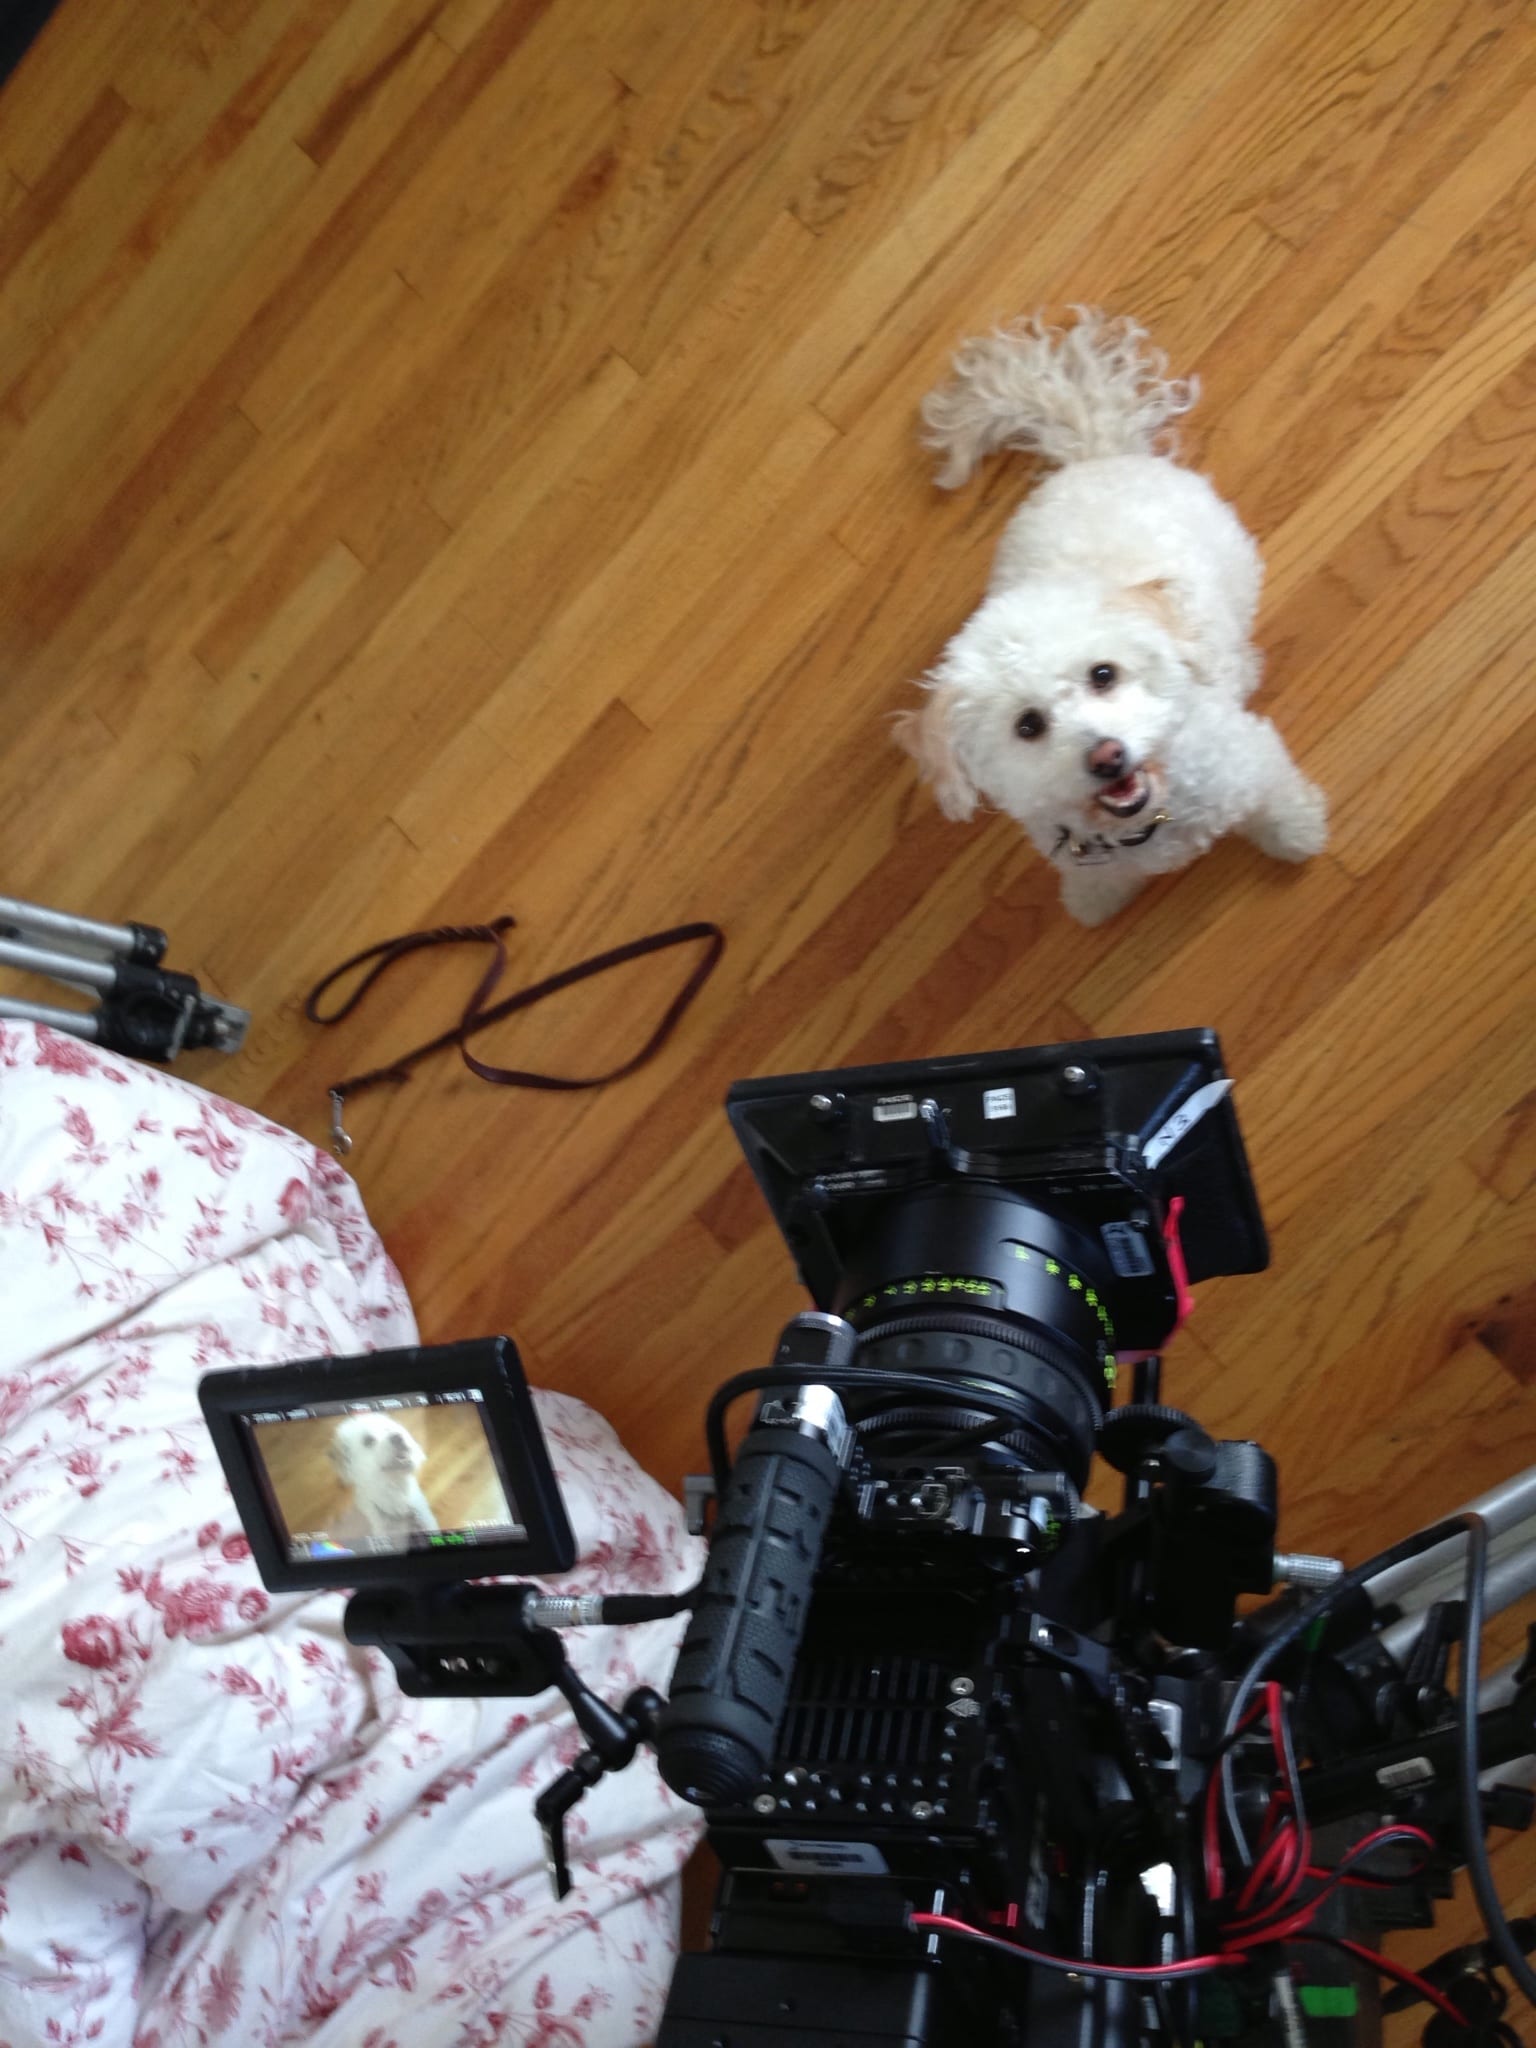 How to get my dog into show business? All about dog acting, modeling, the working dog and the production world